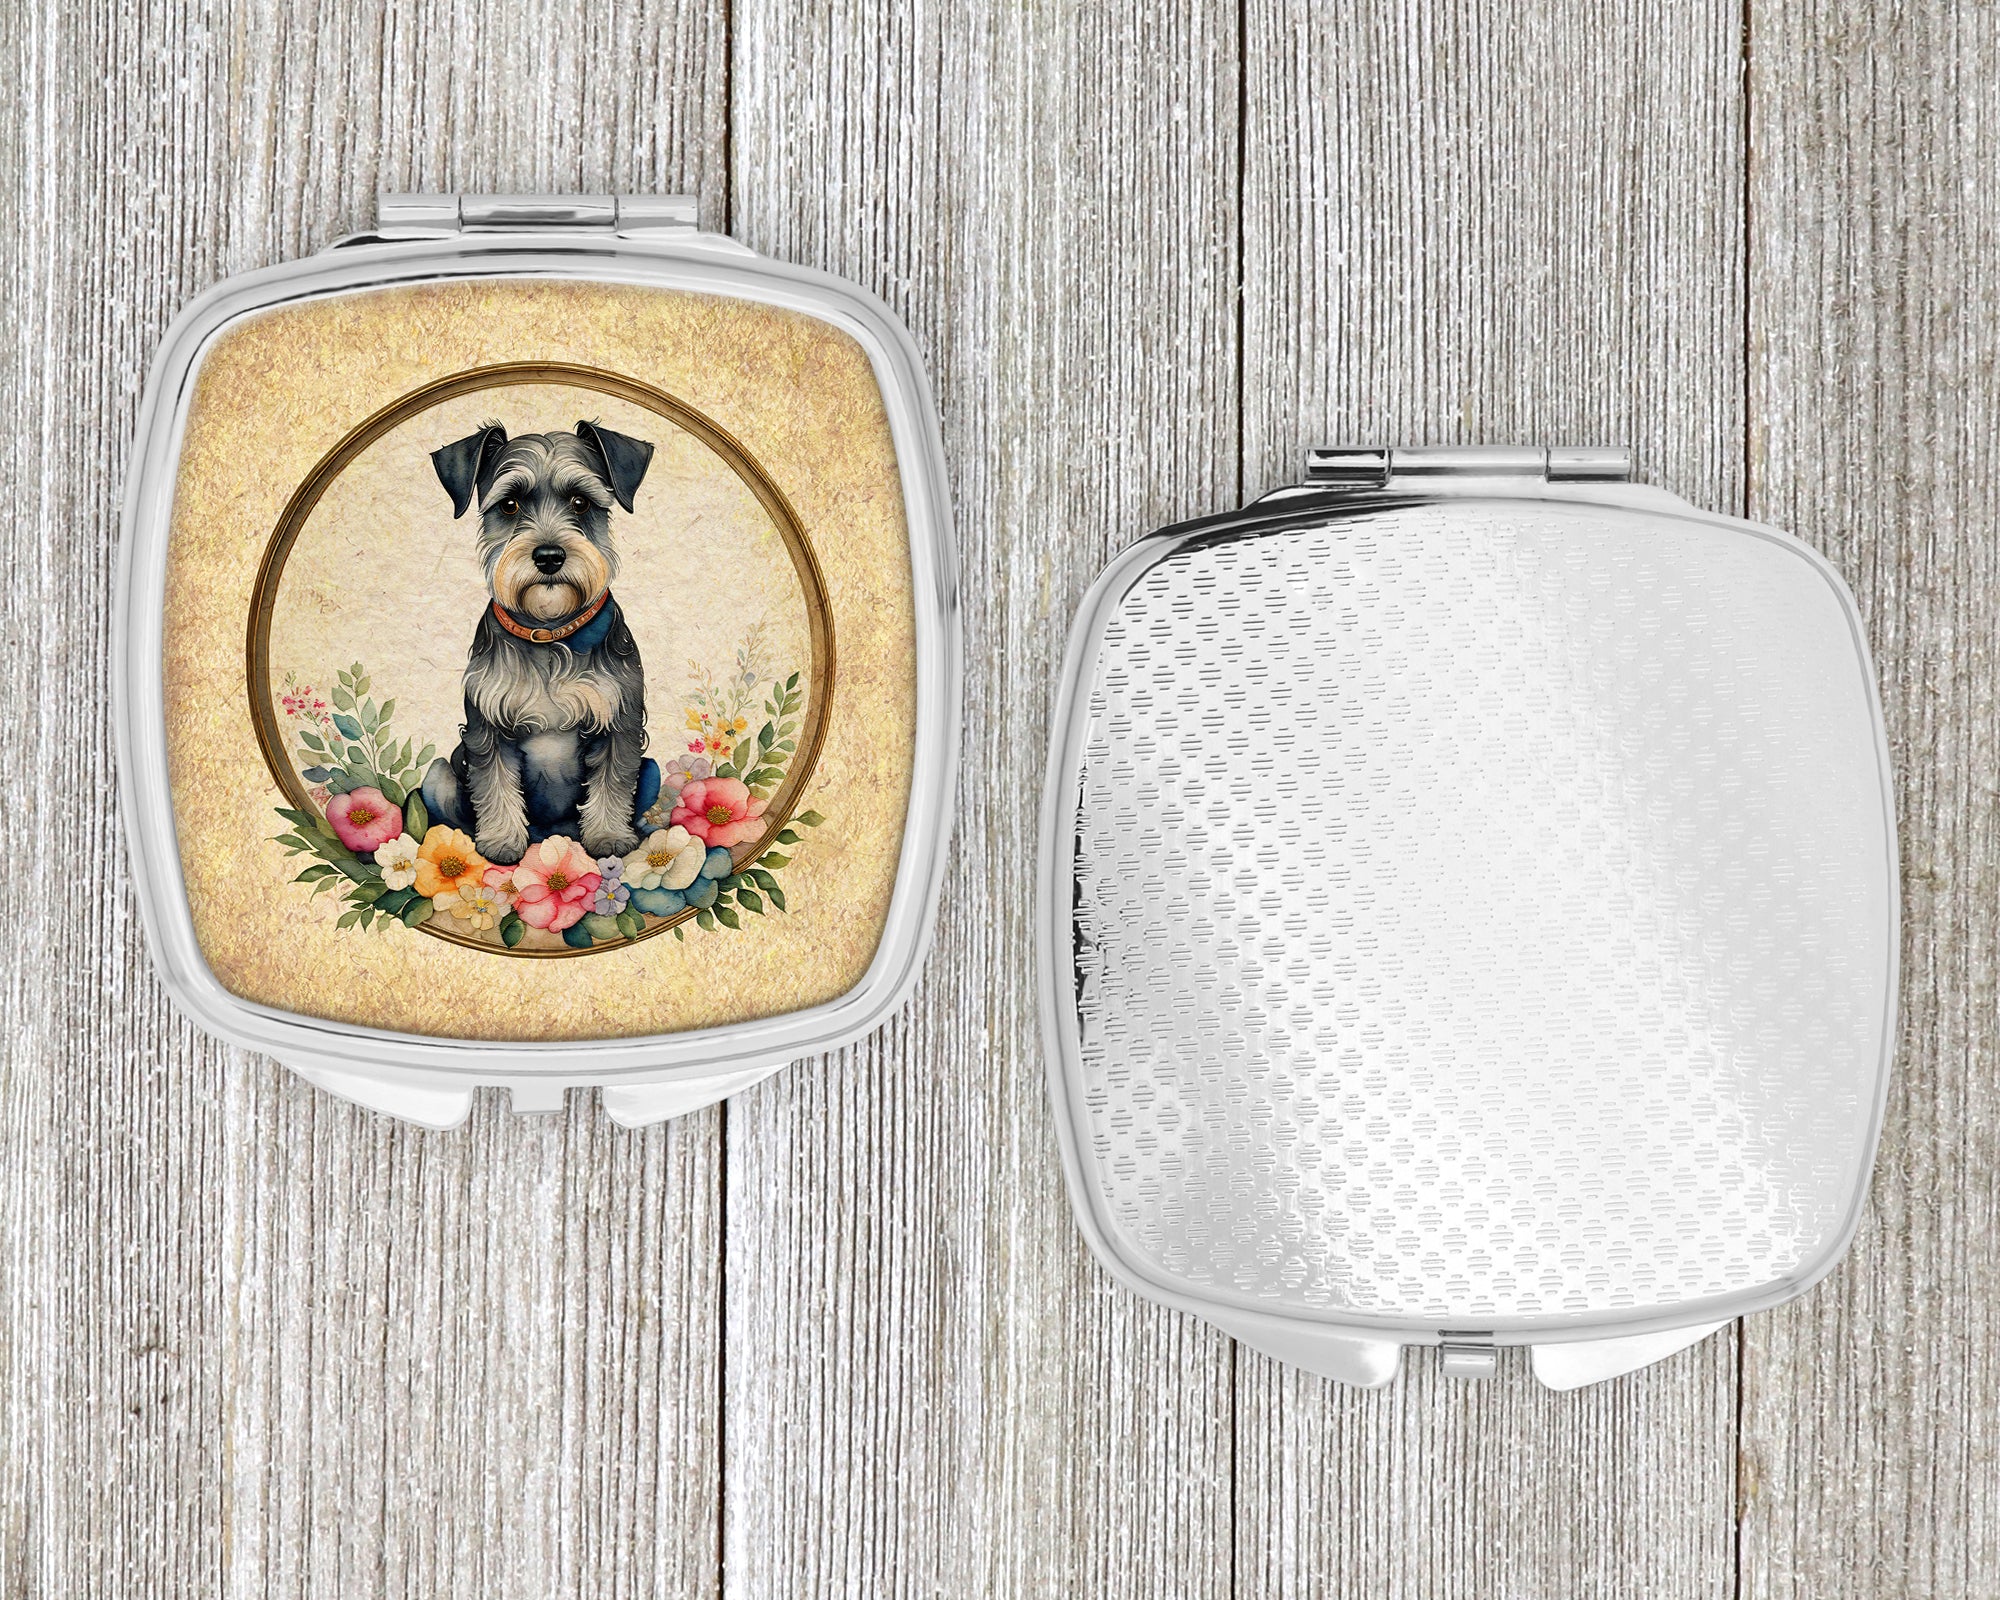 Schnauzer and Flowers Compact Mirror